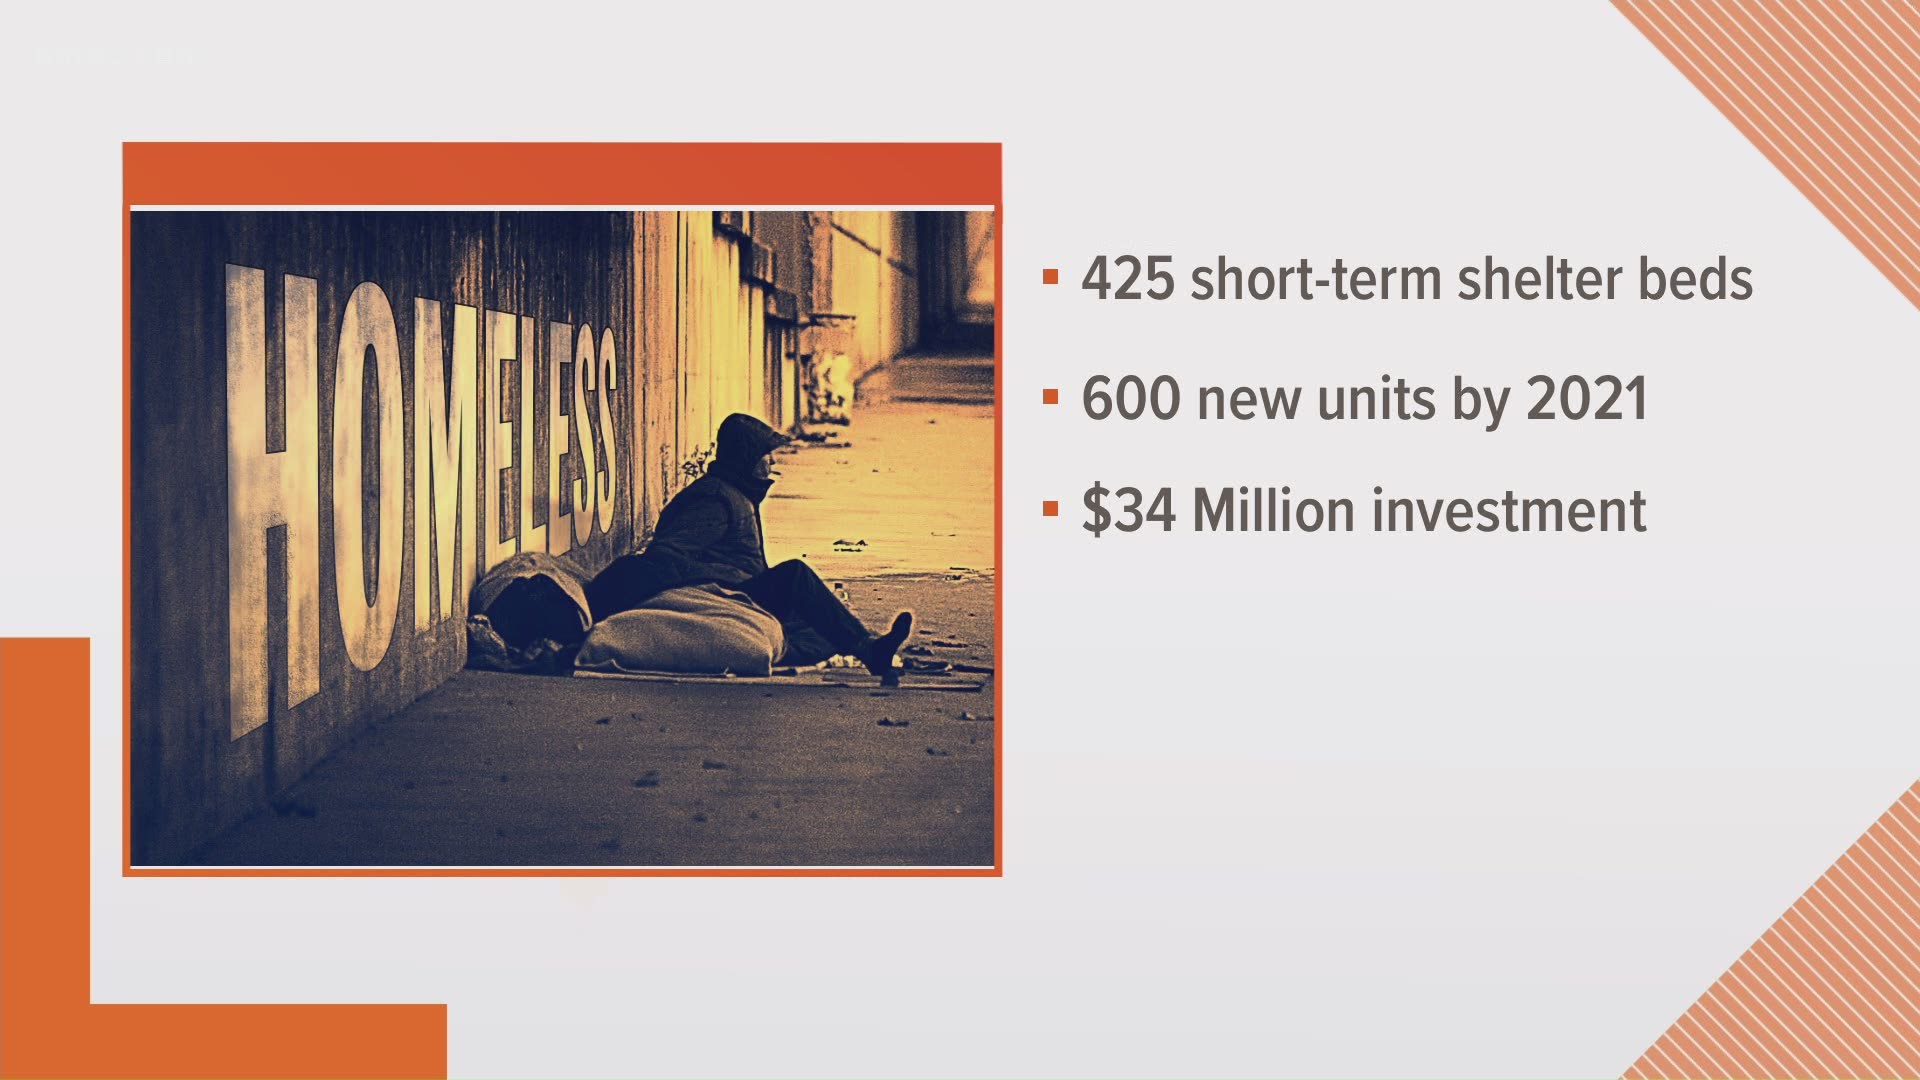 The mayor's proposal represents a $34 million investment that would create both short term shelter beds and permanent housing units.